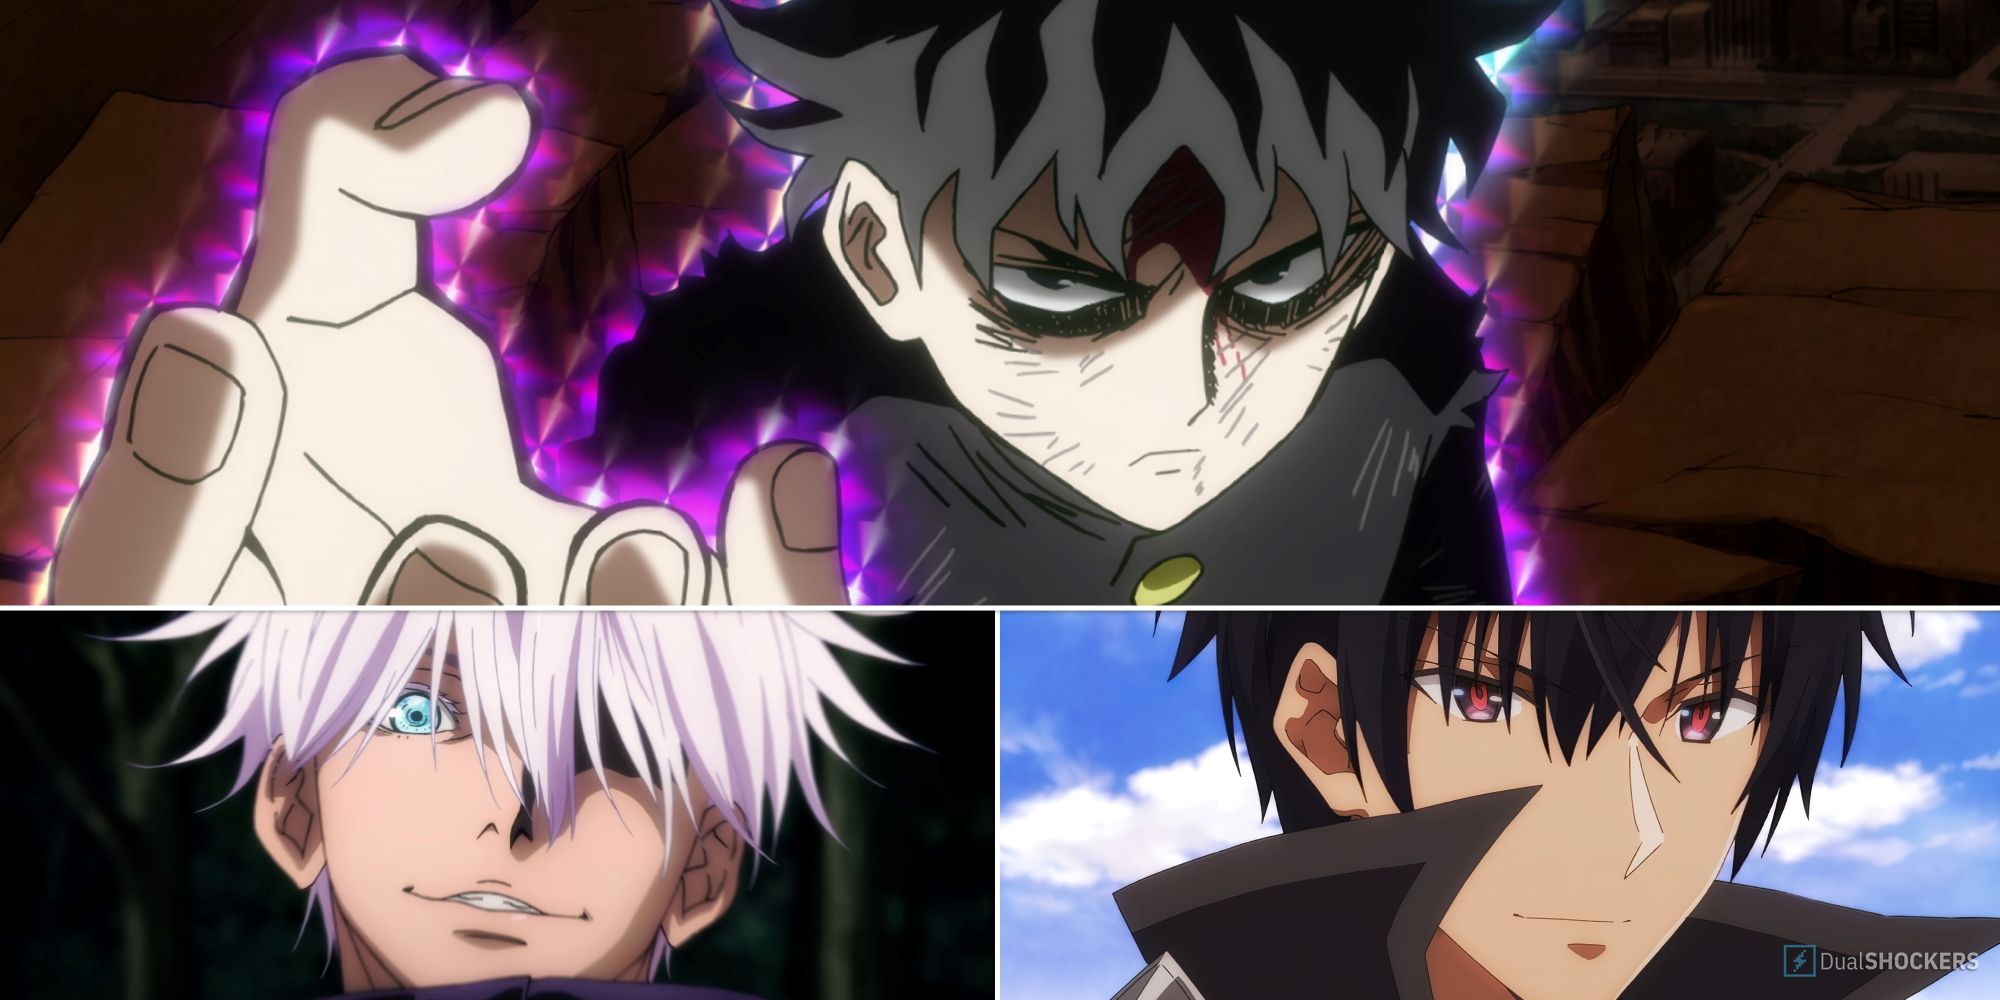 Shigeo from Mob Psycho 100, Gojo From Jujutsu Kaisen, and Anos From Devil Academy